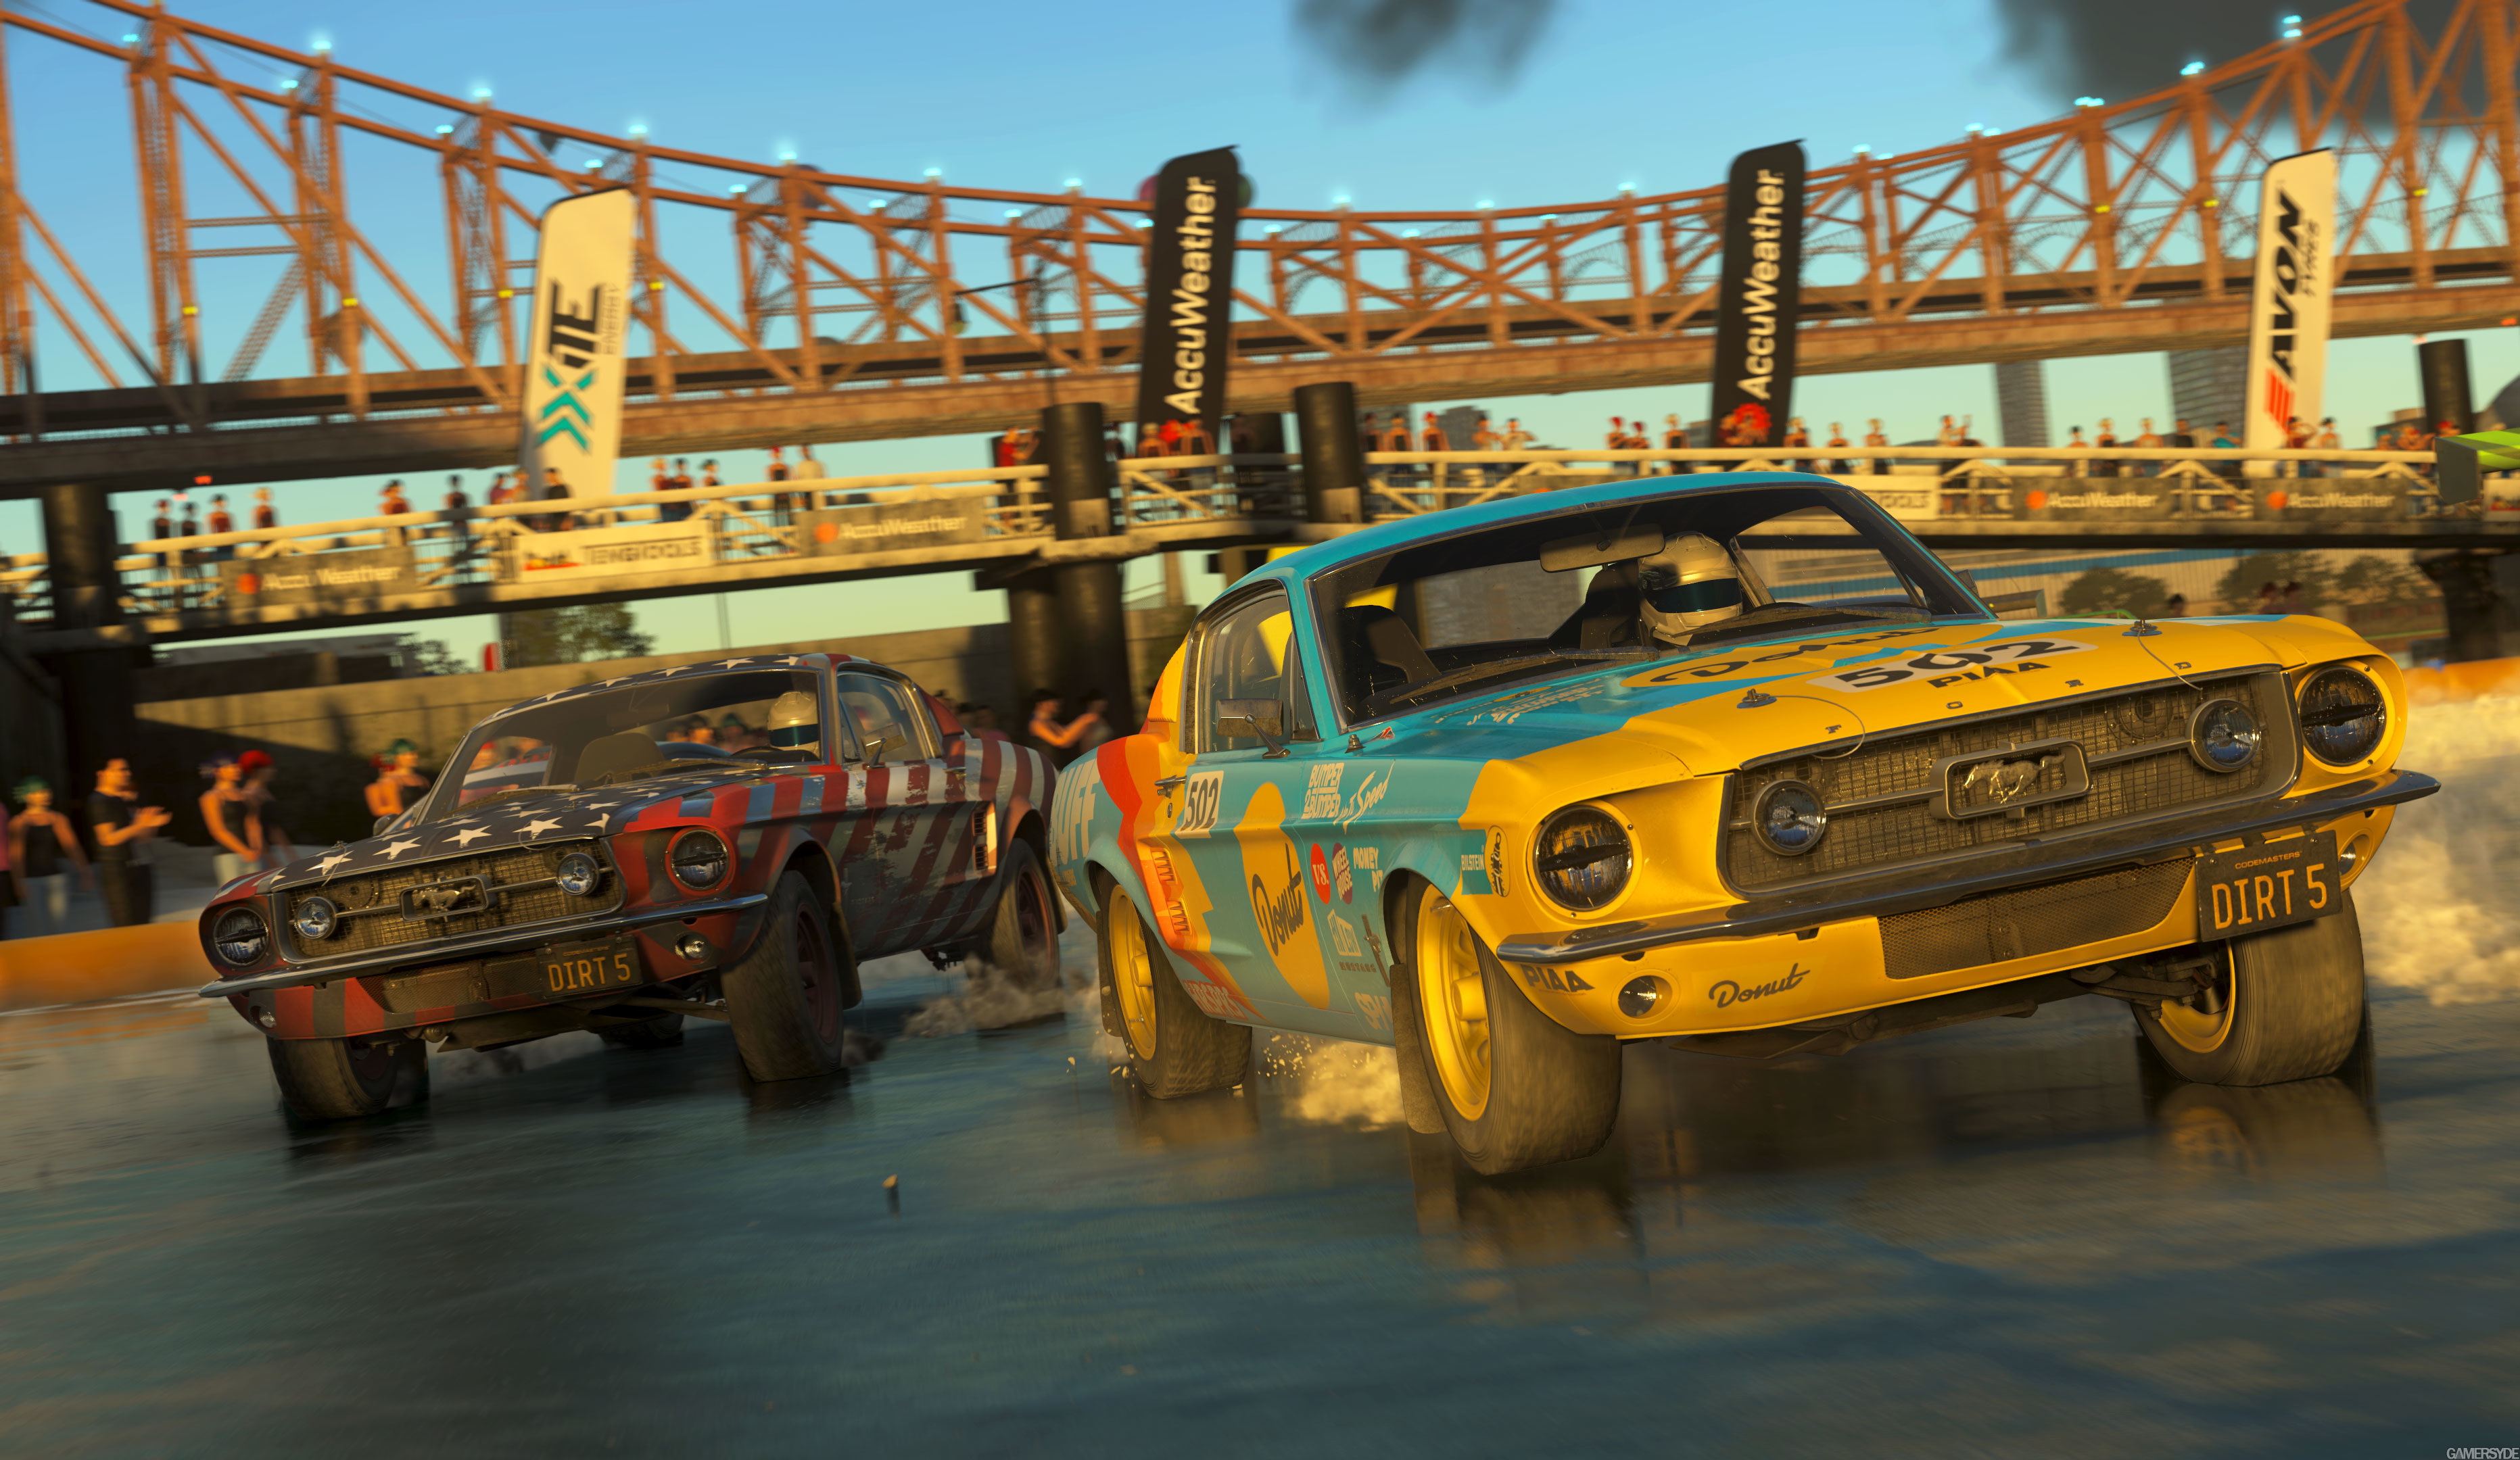 dirt 5 year one edition download free